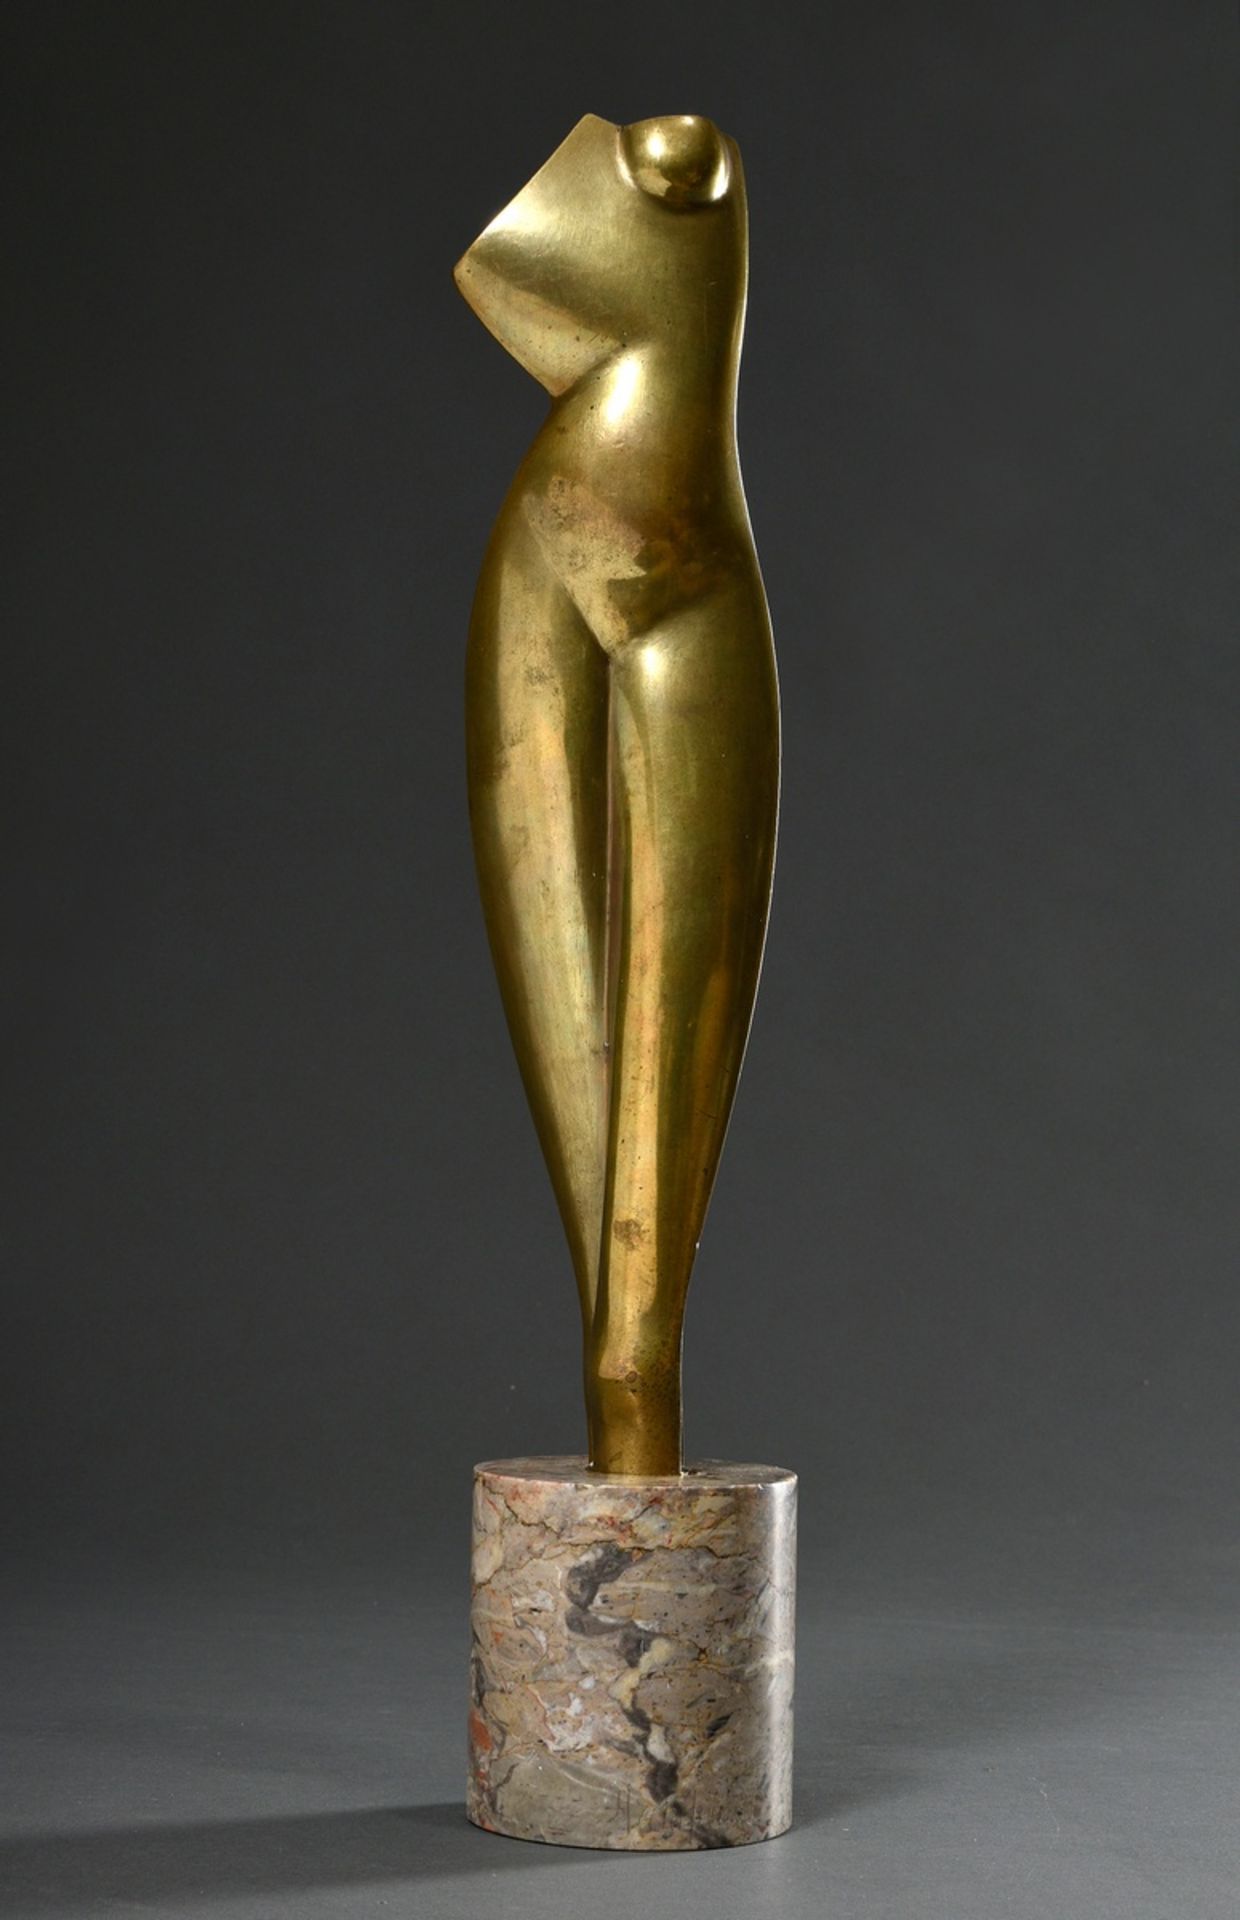 Archipenko, Alexander (1887-1964) "Flat Torso" 1914, early life cast around 1920, bronze with gold-